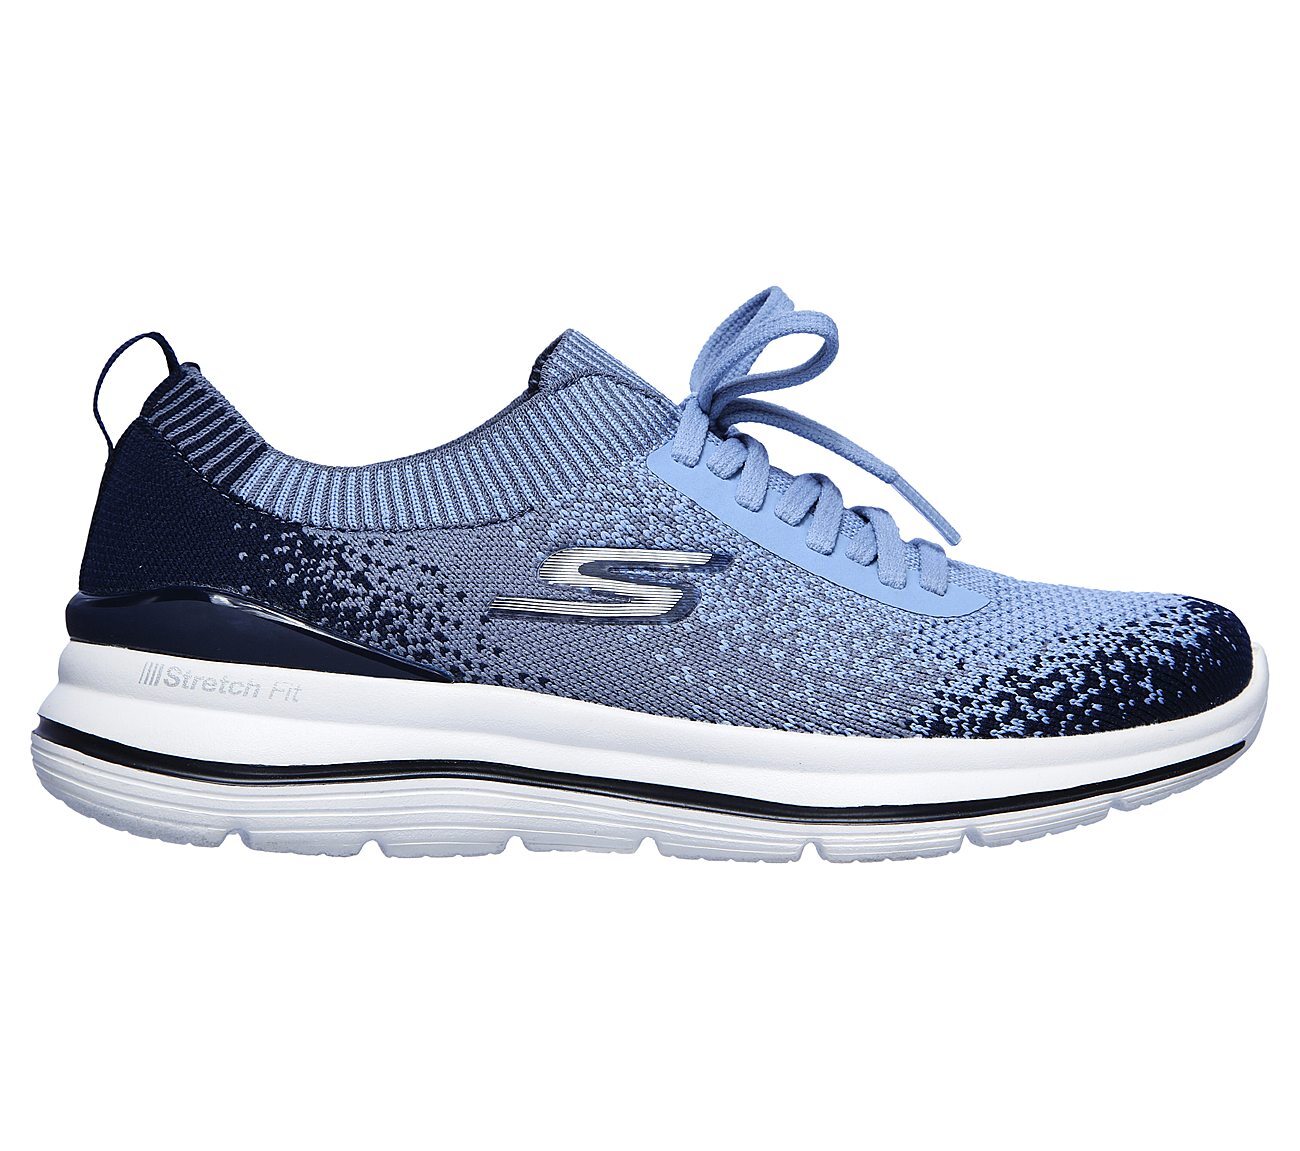 Skechers Navy/Blue Go Walk Stretch Fit Womens Lace Up Shoes - Style ID ...